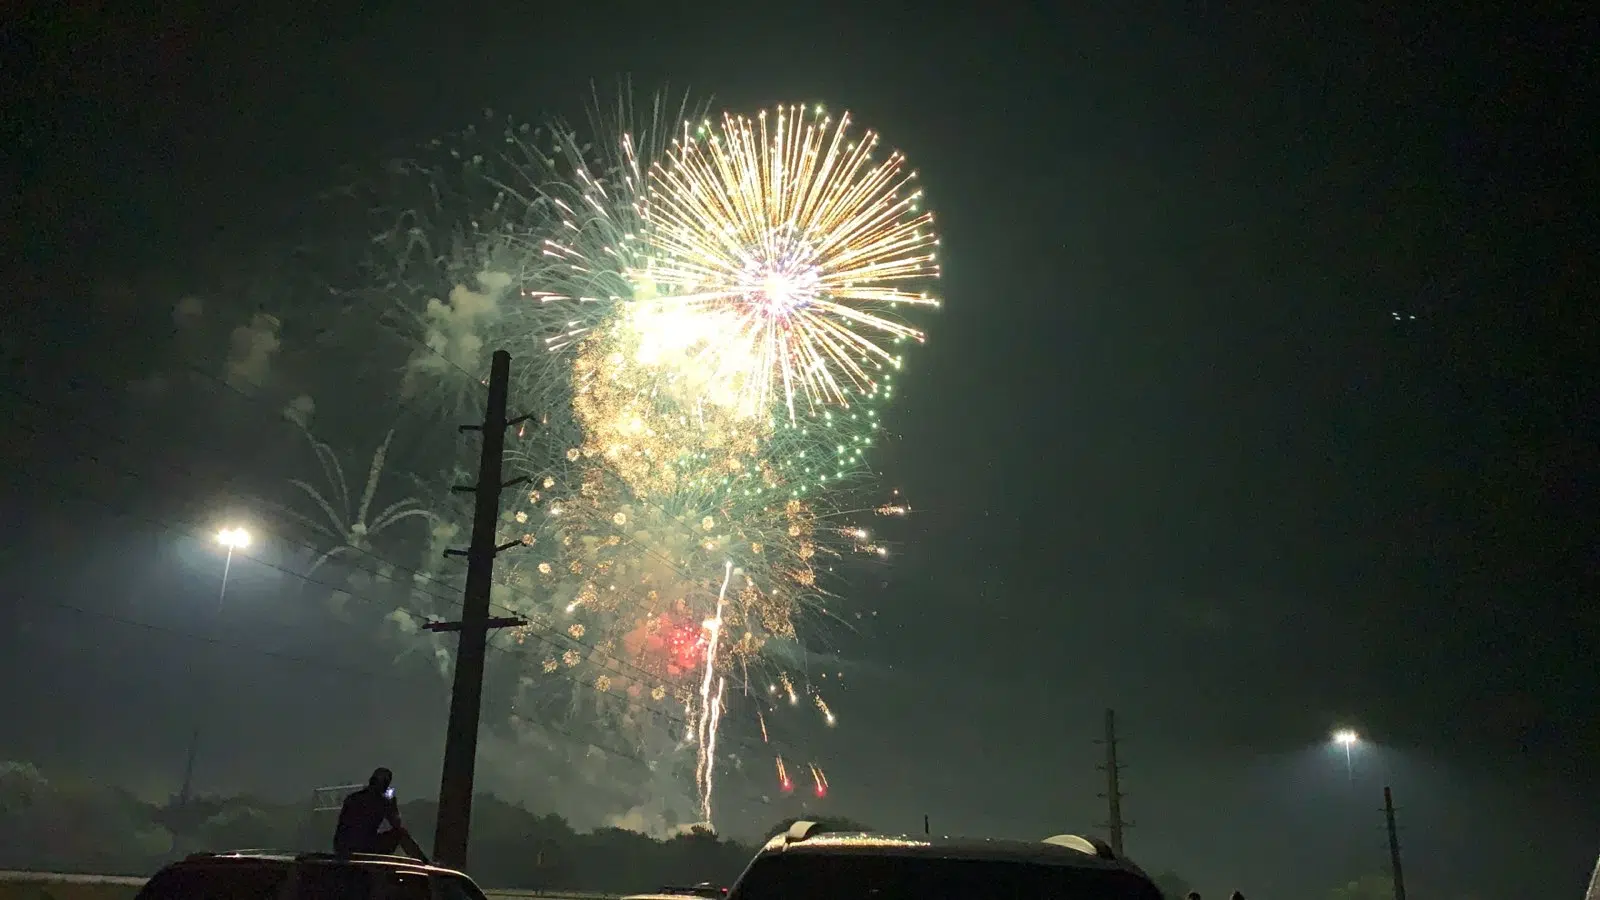 Emporia fireworks sales and discharge period begins Monday